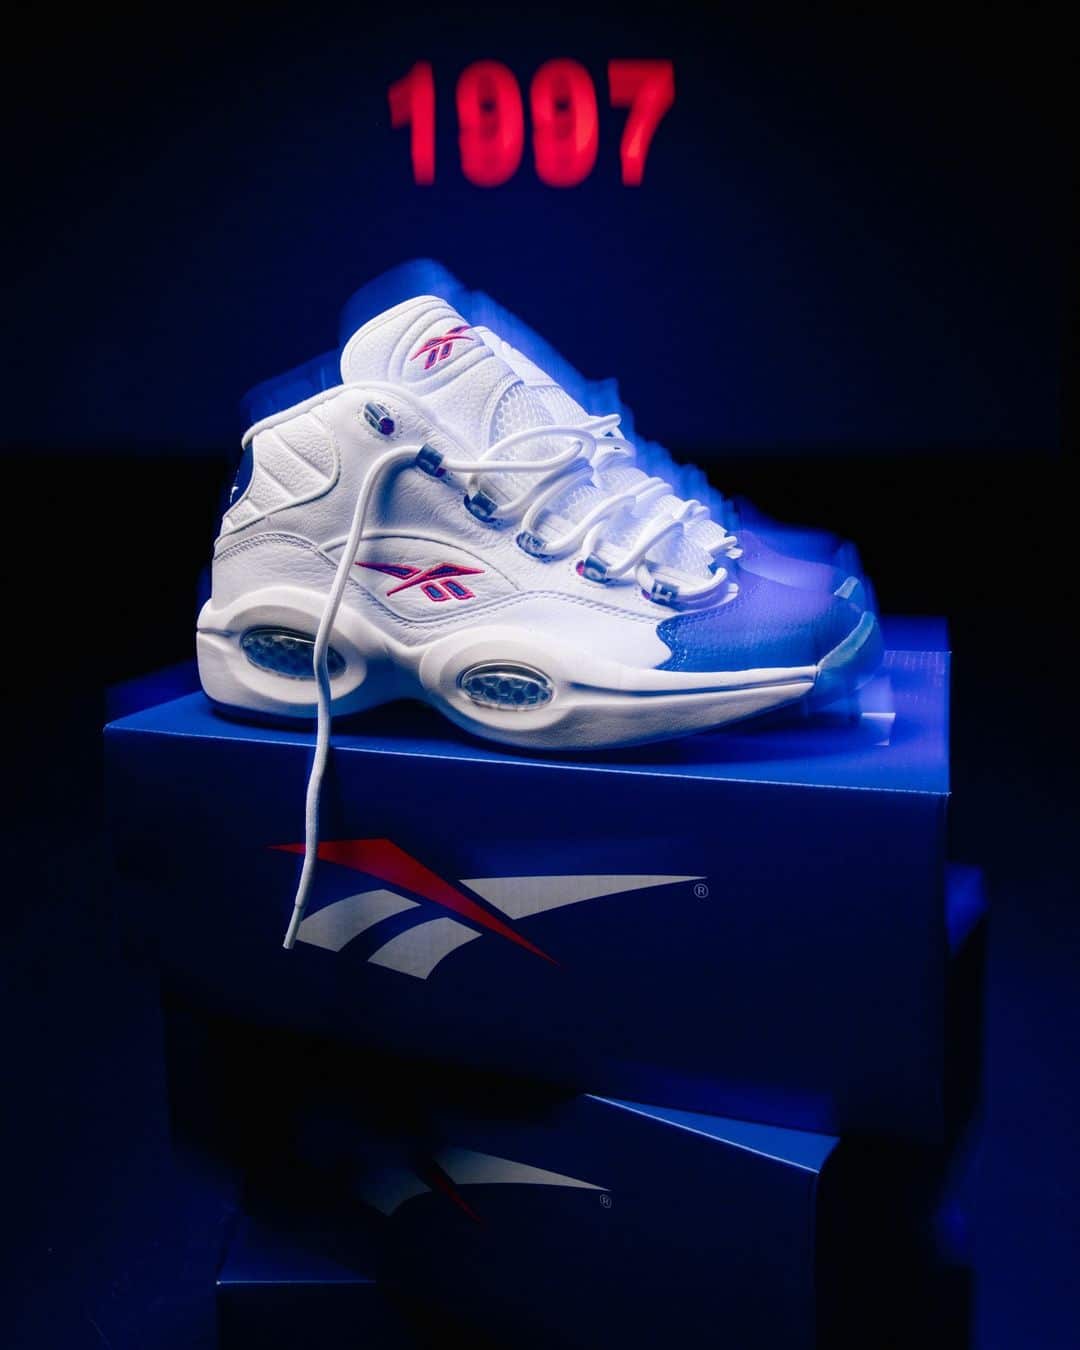 inland chapter is there At BSTN, the Reebok Question Mid "Blue Toe" Is Back | Grailify